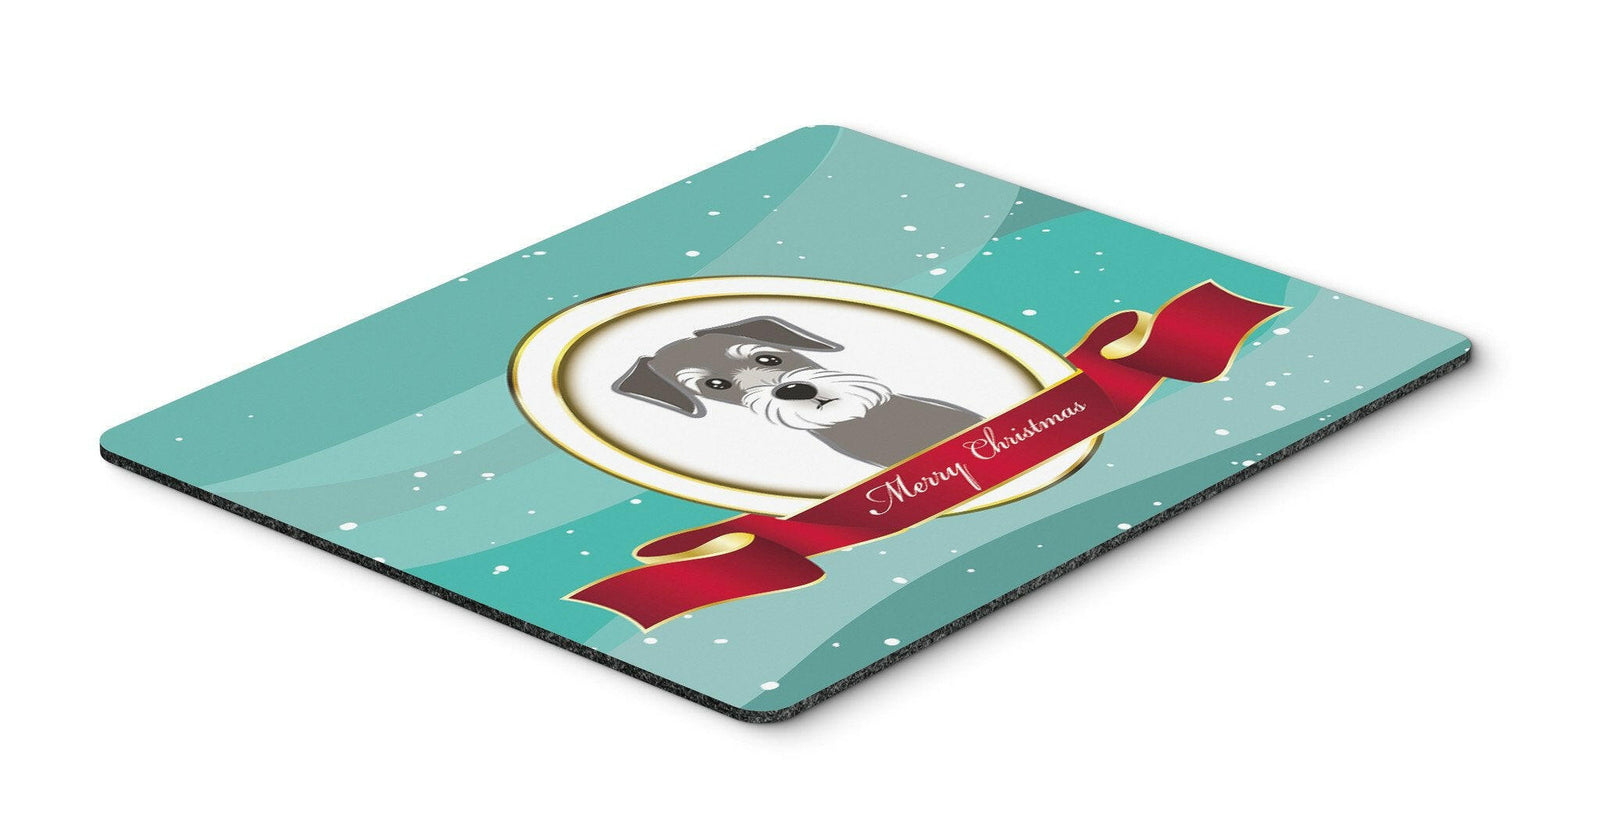 Schnauzer Merry Christmas Mouse Pad, Hot Pad or Trivet BB1516MP by Caroline's Treasures